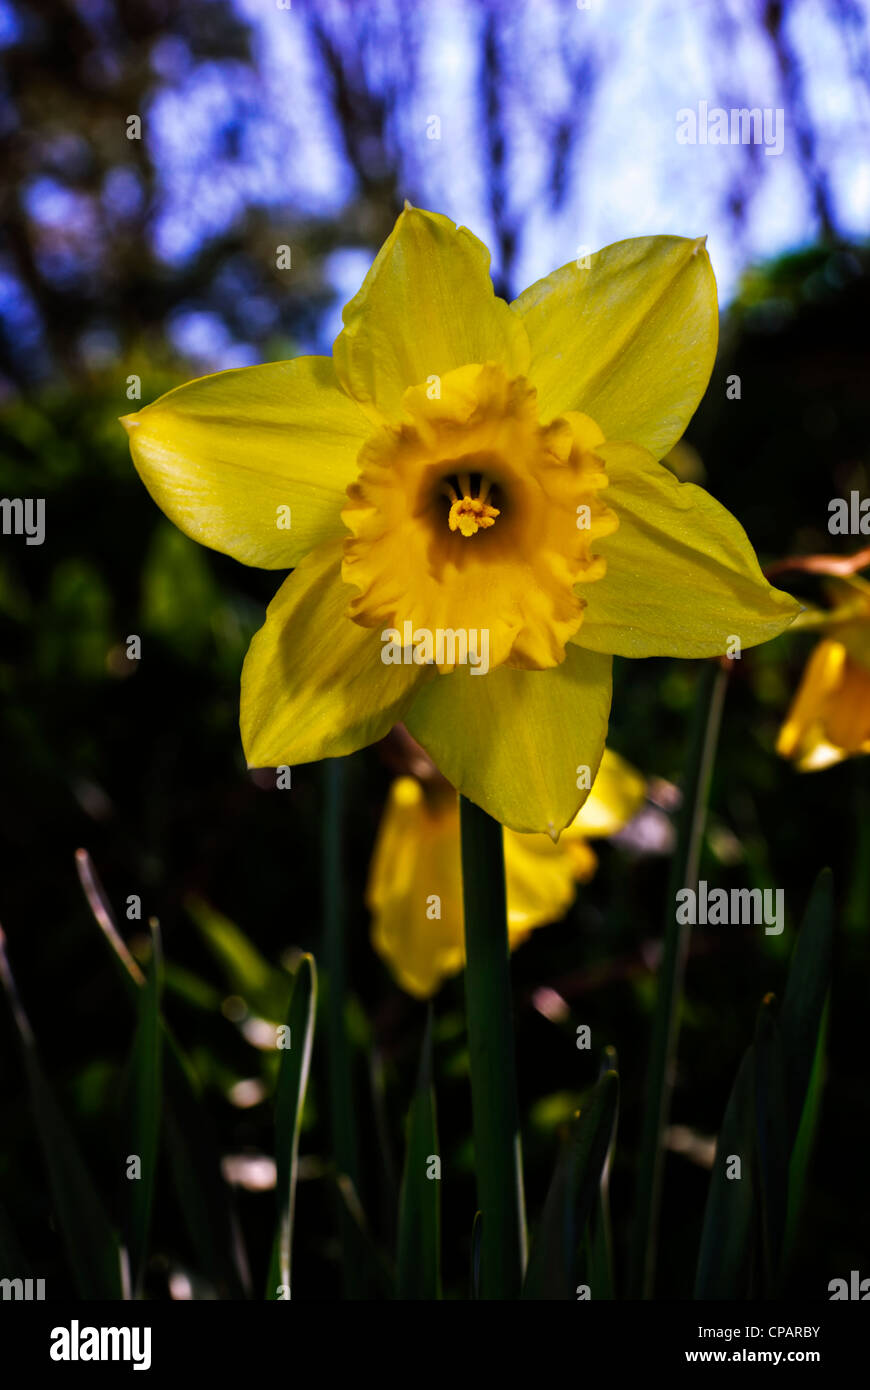 Daffodil, a spring sign. Stock Photo